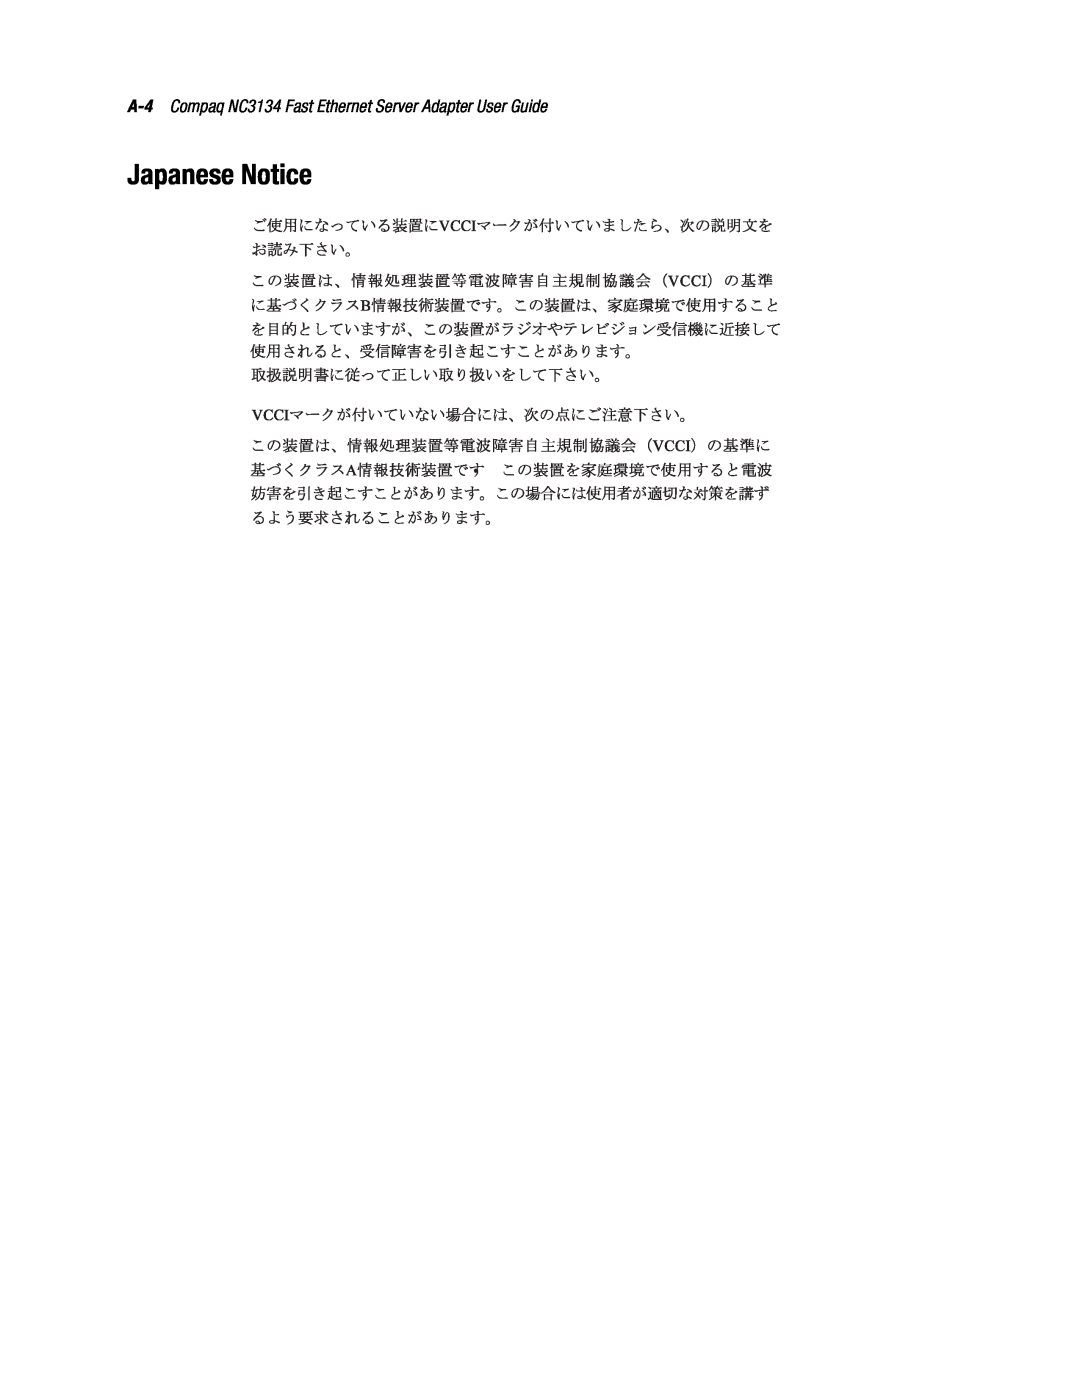 Compaq manual Japanese Notice, A-4 Compaq NC3134 Fast Ethernet Server Adapter User Guide 